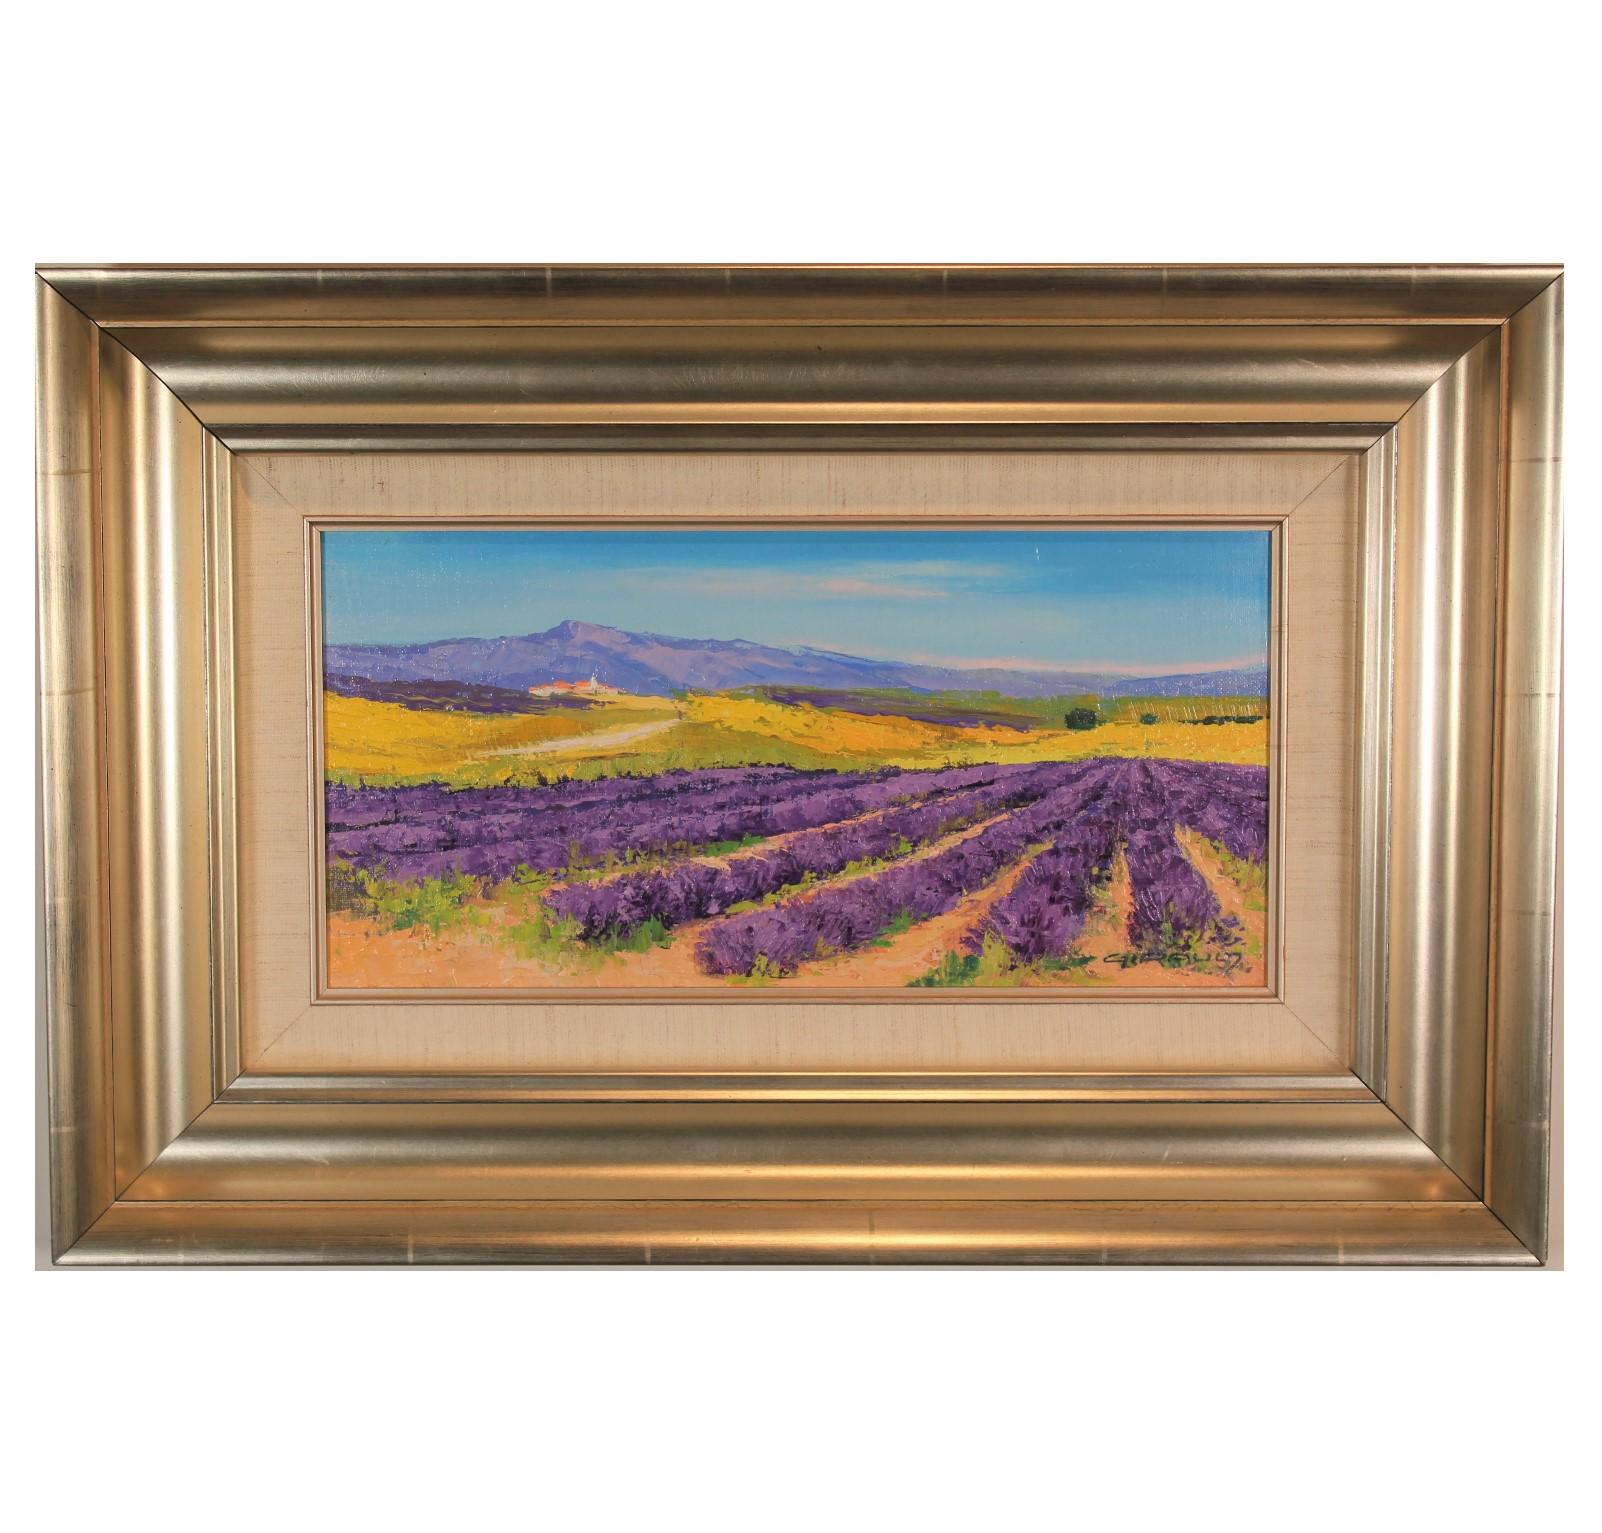 "Lavandes a Simiane" Landscape of a Lavender Field - Painting by Daniel Girault 